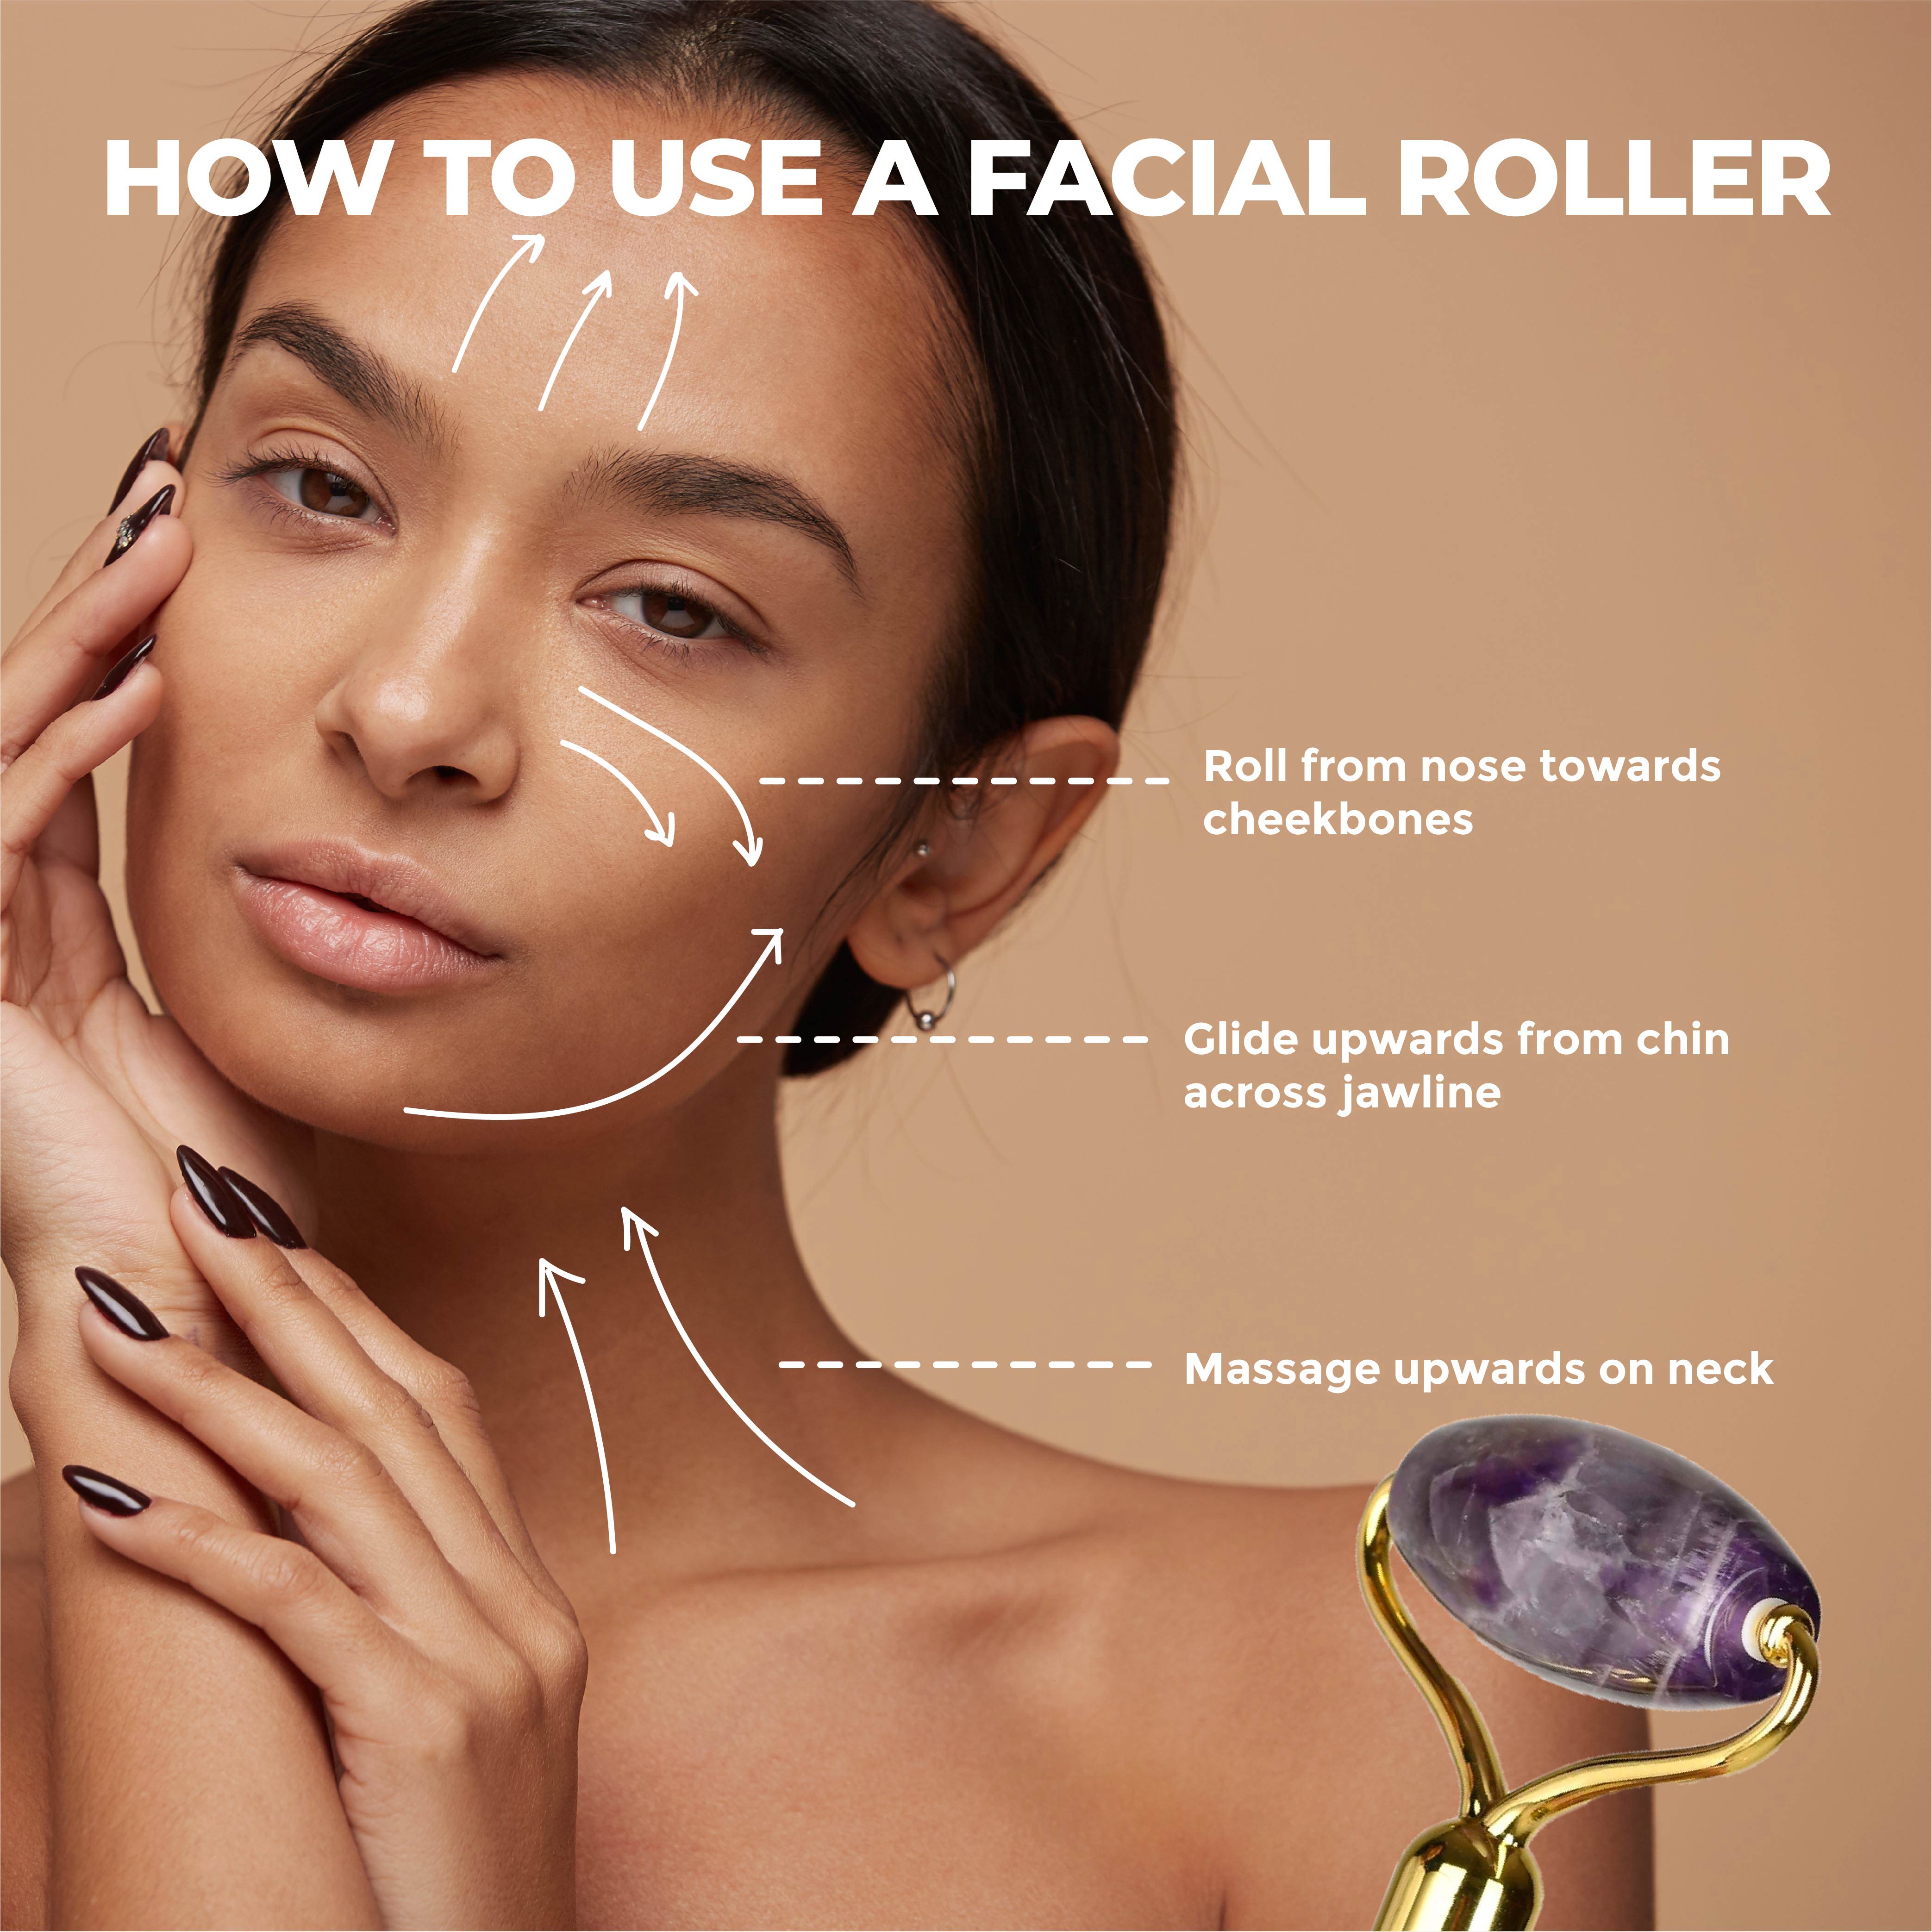 This is an image of how to use the Amethyst Facial Roller by Dromen & Co